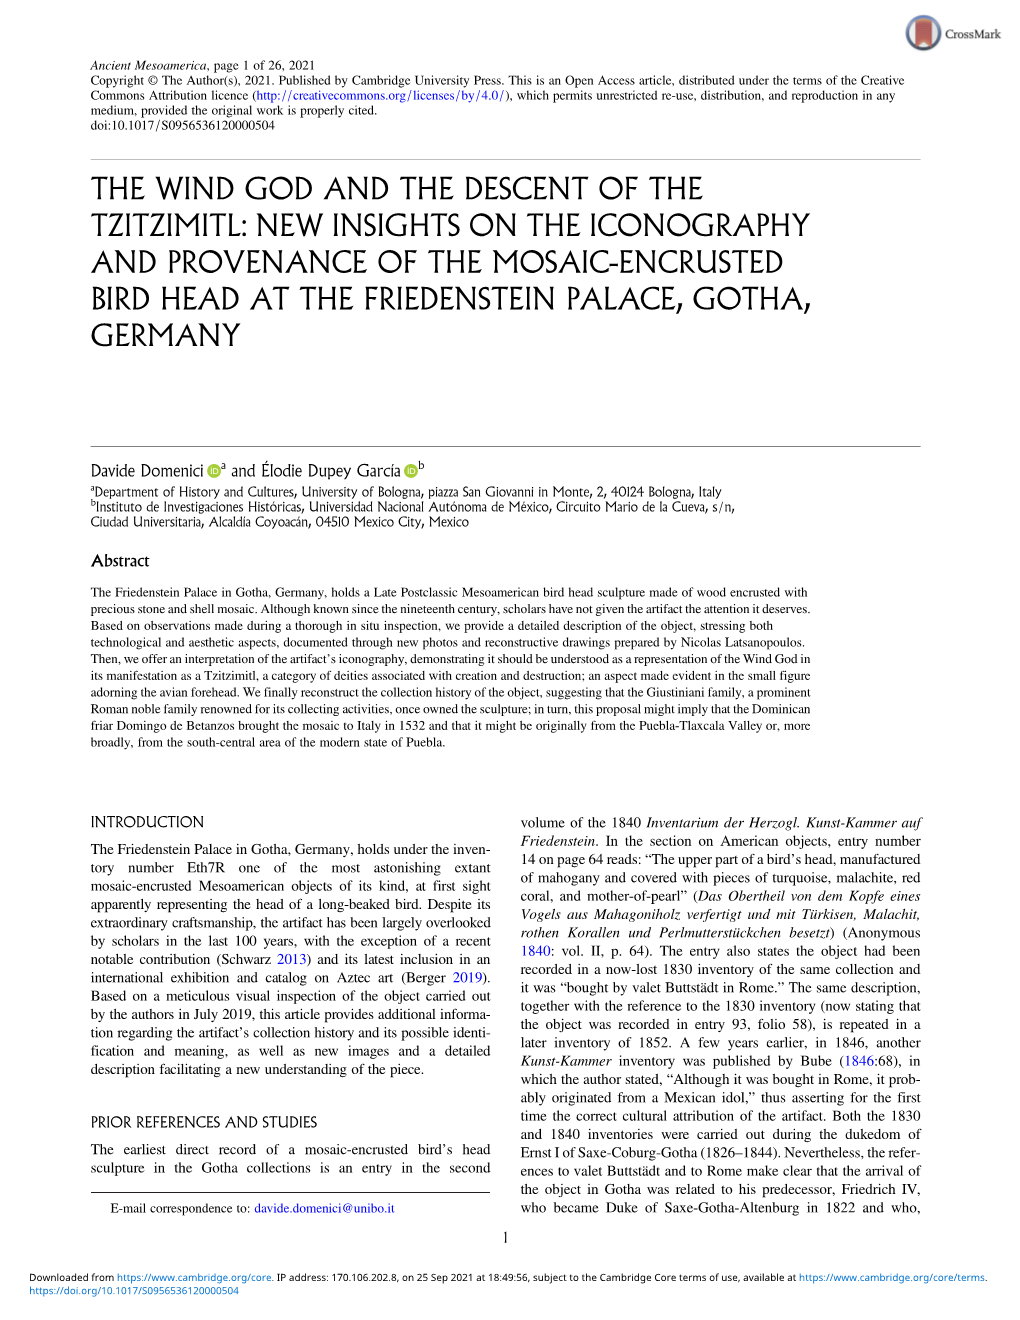 The Wind God and the Descent of the Tzitzimitl: New